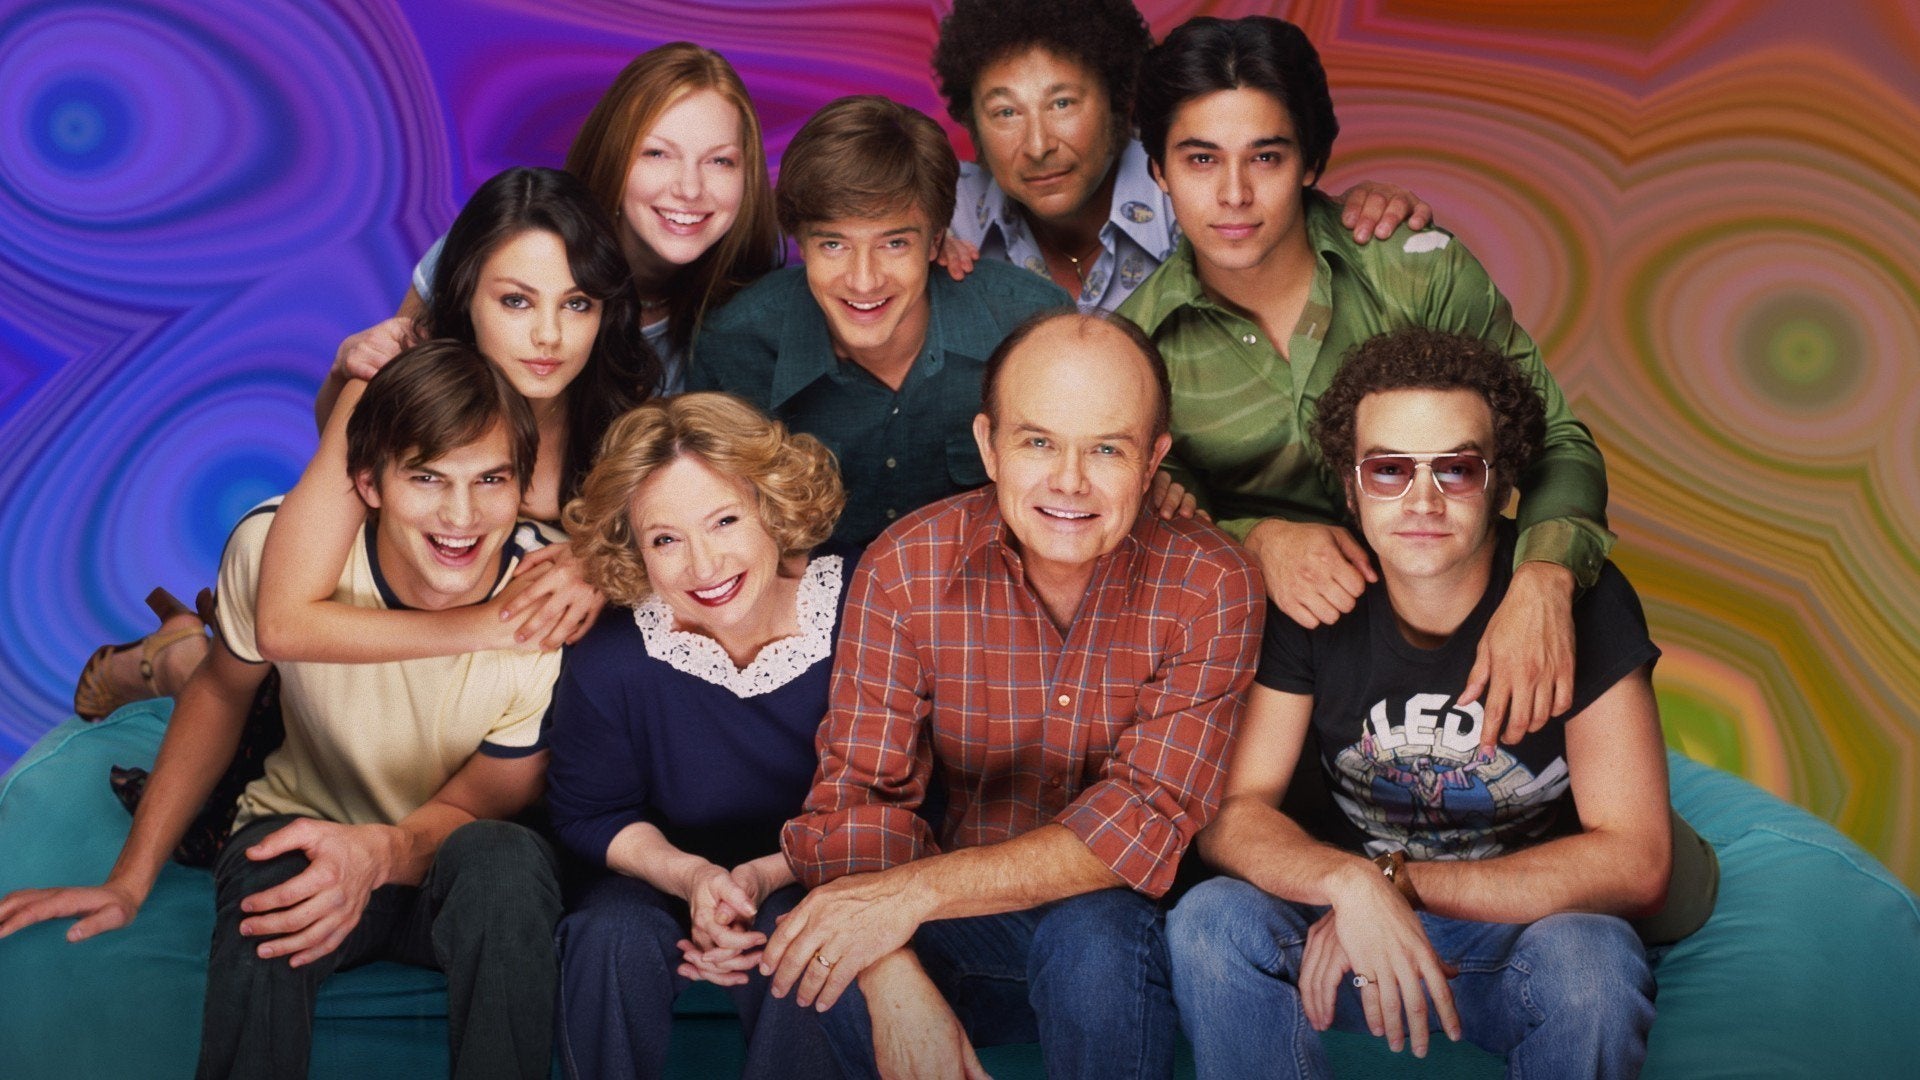 That ’70s Show: The Complete Series Remastered - Seasons 1-8